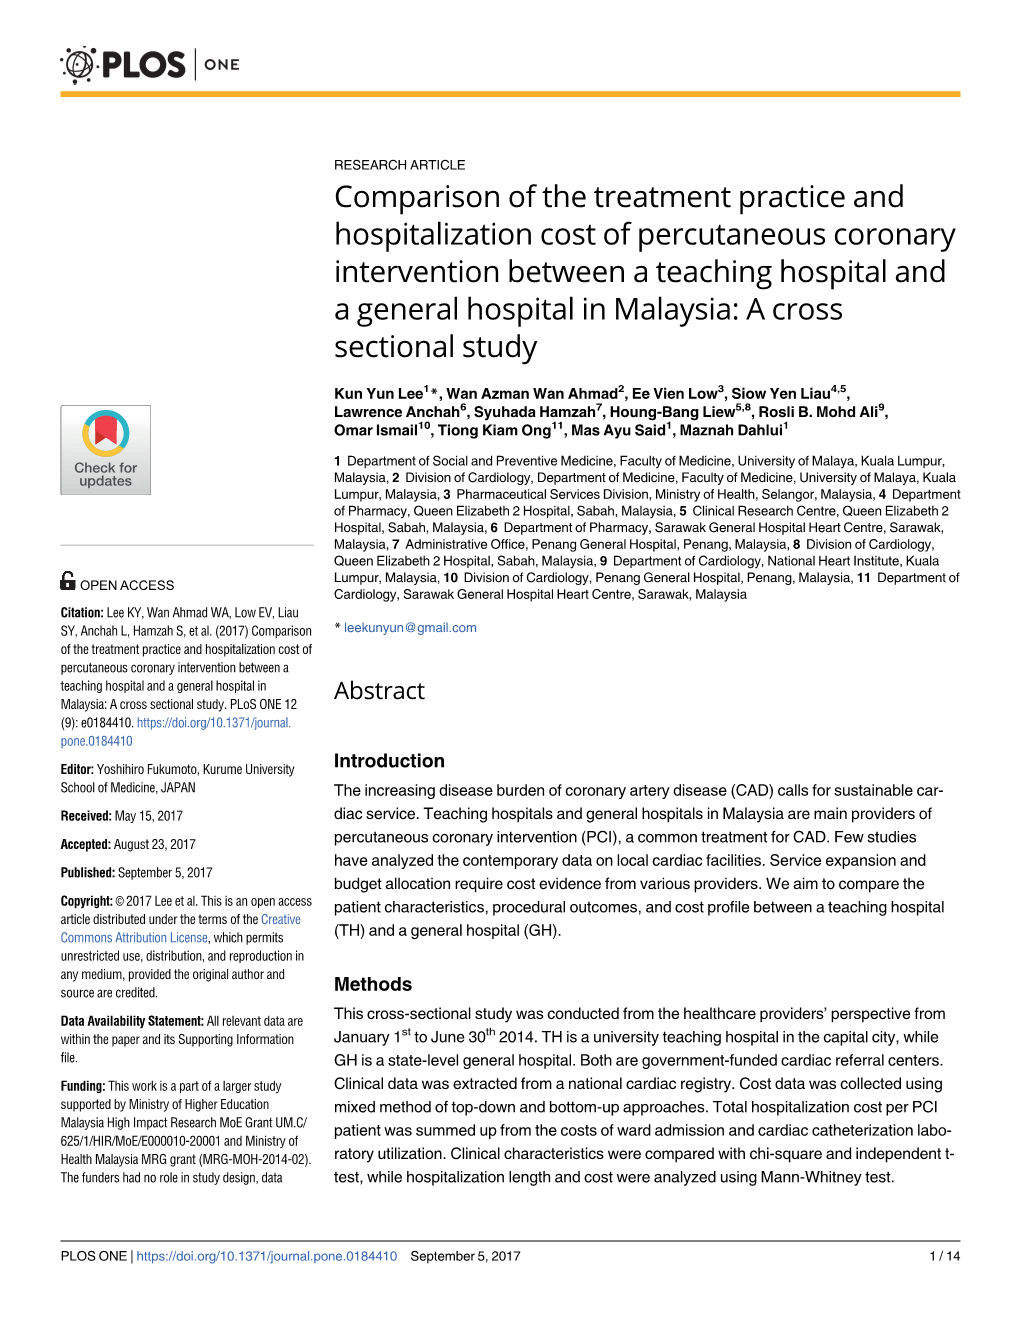 Comparison of the Treatment Practice and Hospitalization Cost Of